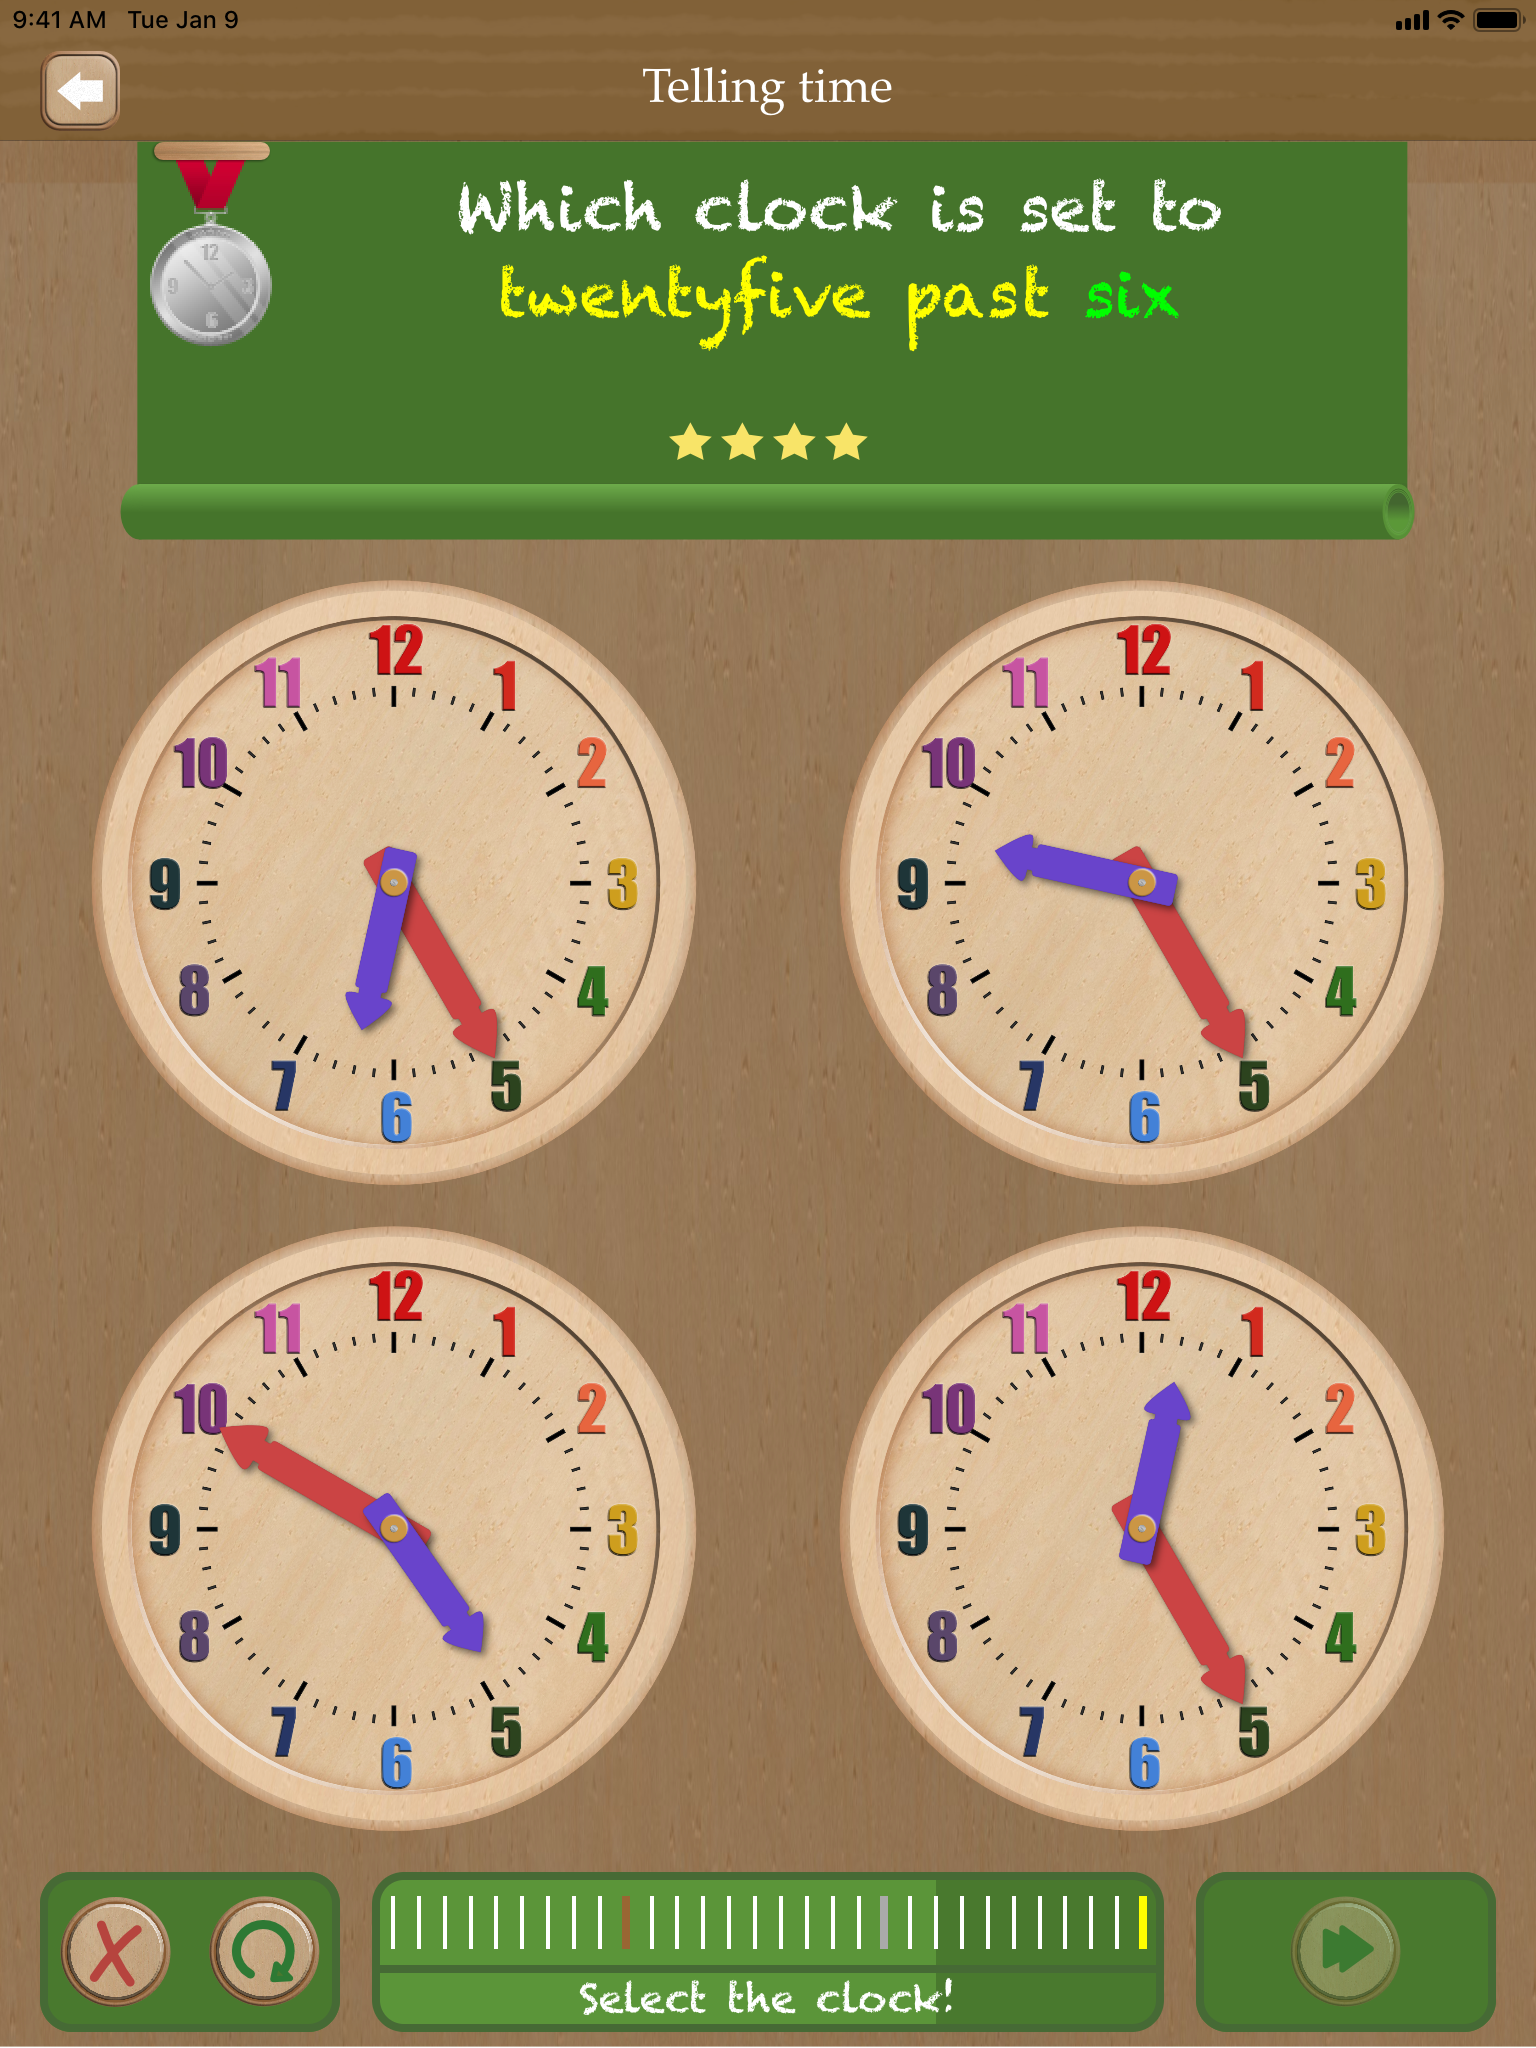 Thumbnail: Set the clock - telling time on iPad App - game type 'Compare an analog and digital clock'